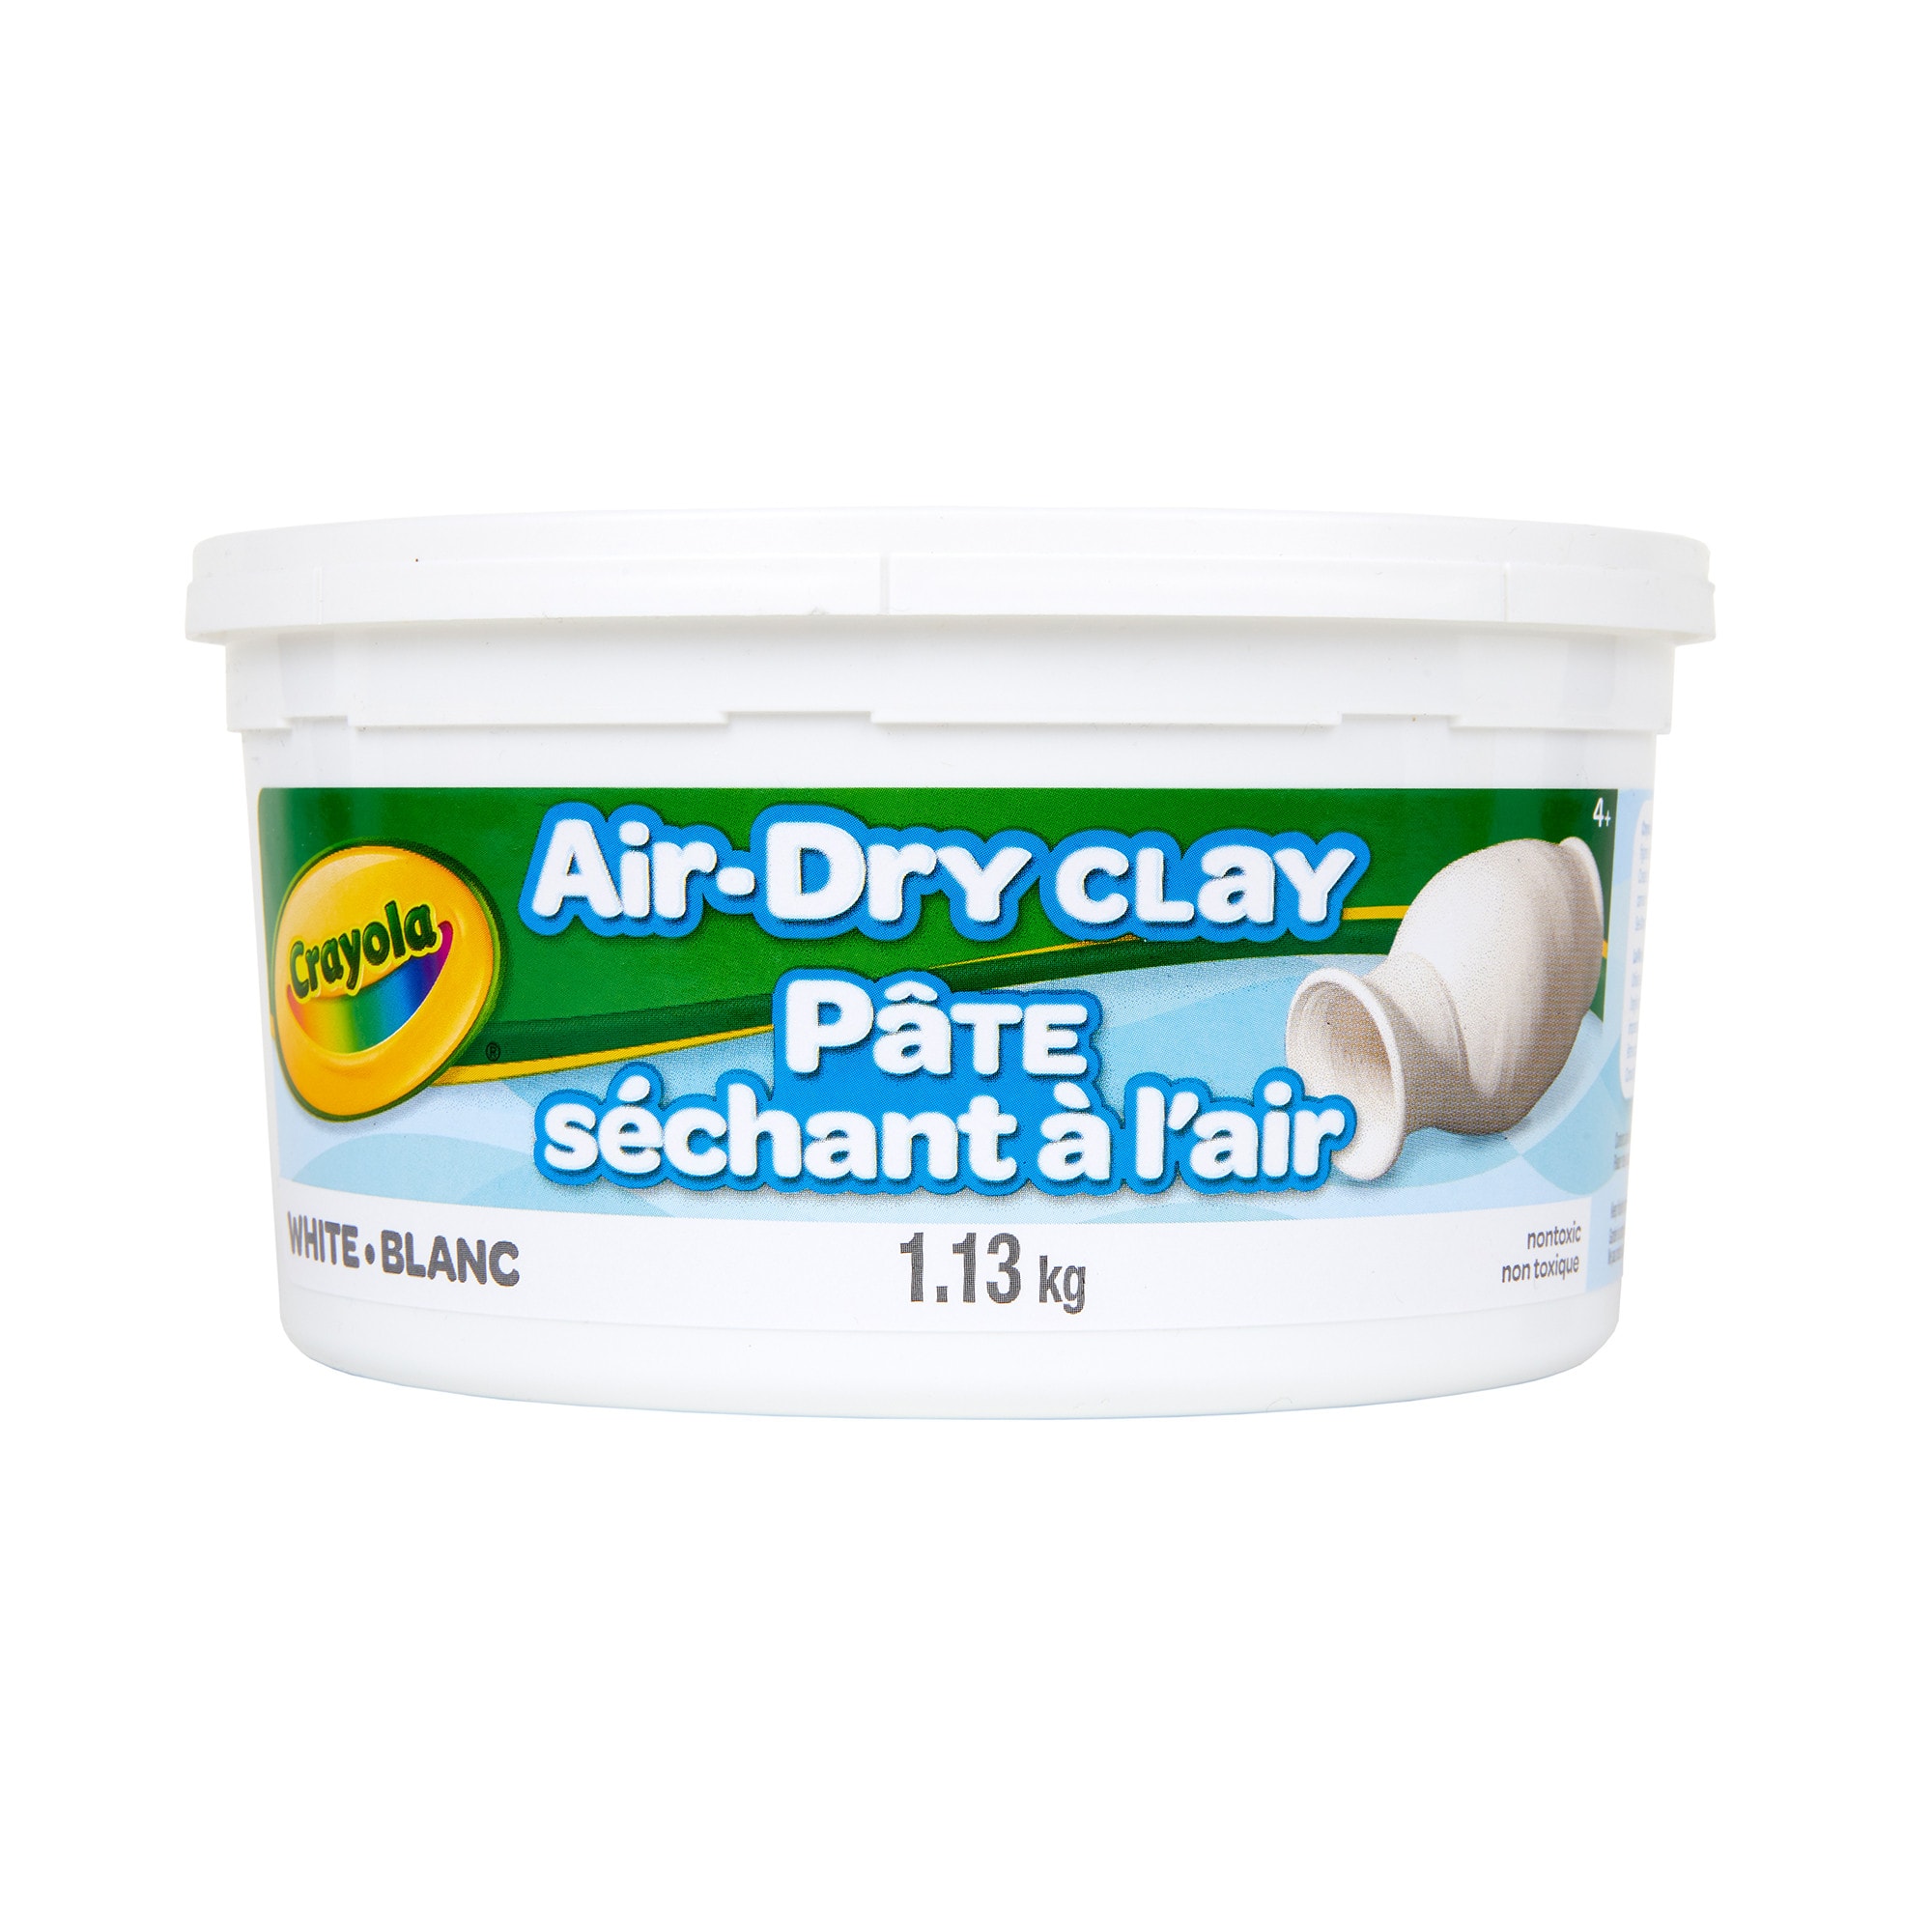 Crayola Air Dry Clay Bucket, White, Arts & Craft Supplies, 2.5 Pounds